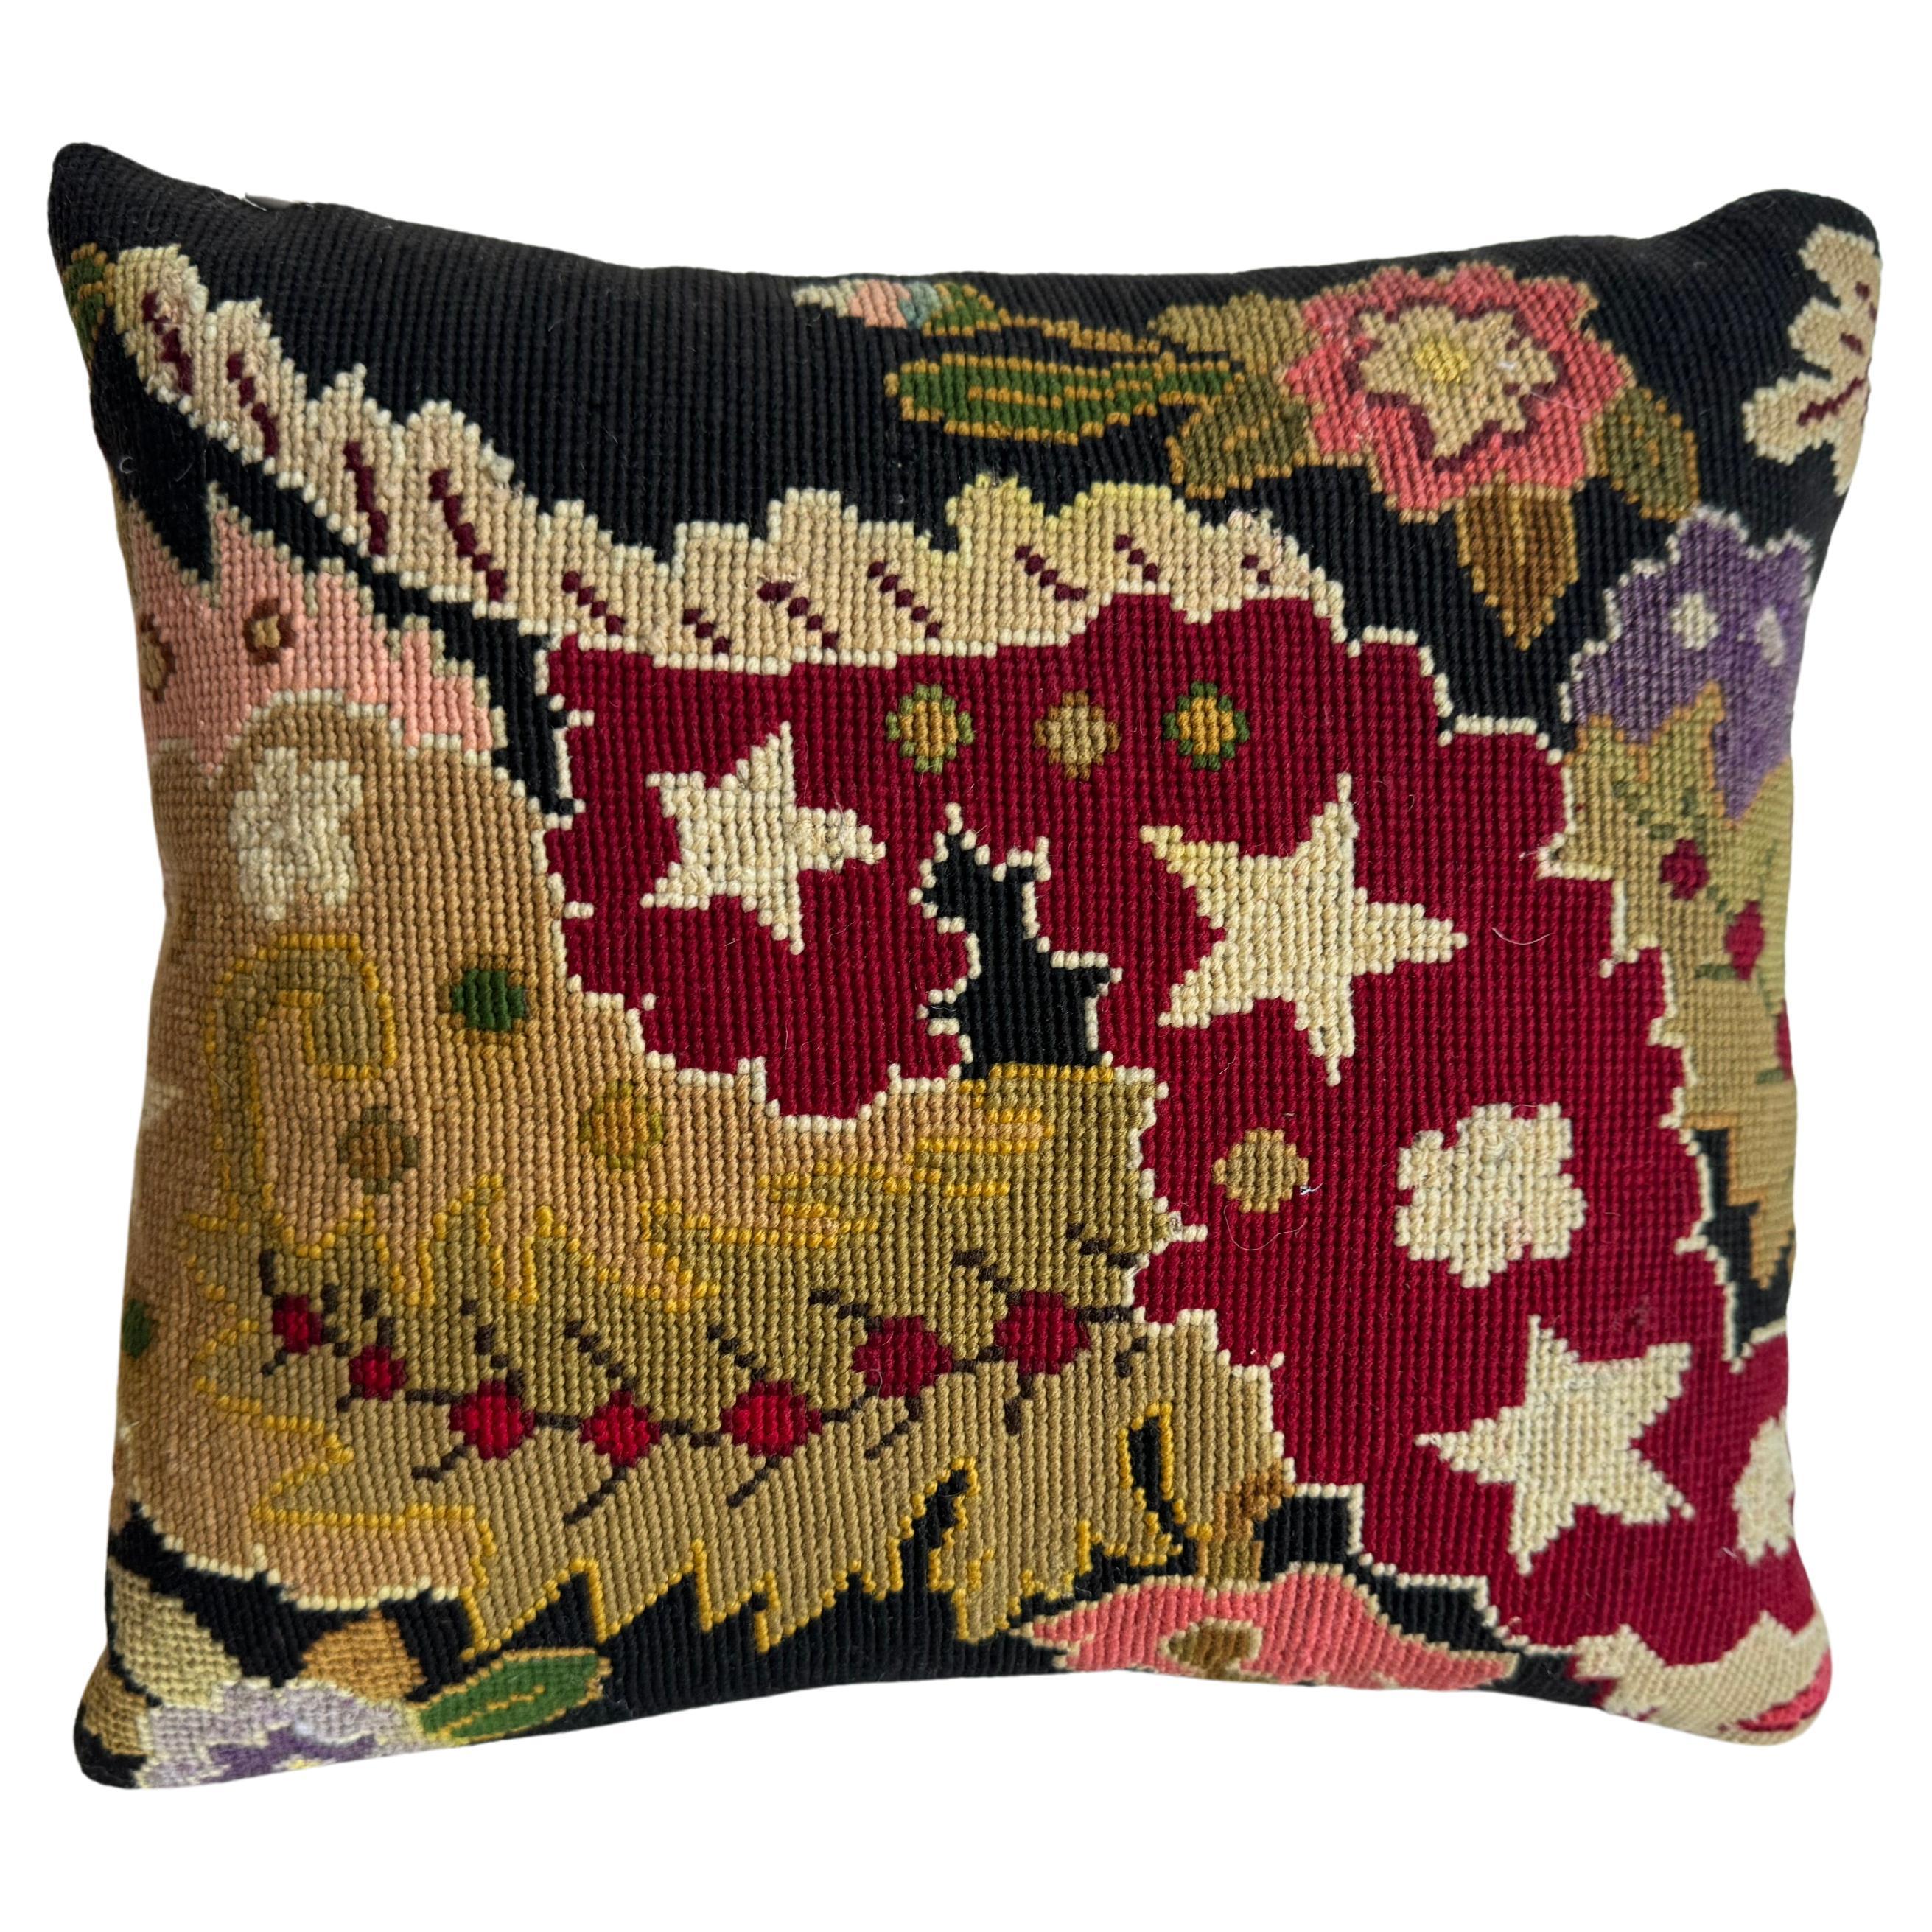 1850 English Needle Work Pillow - 12" X 12' For Sale